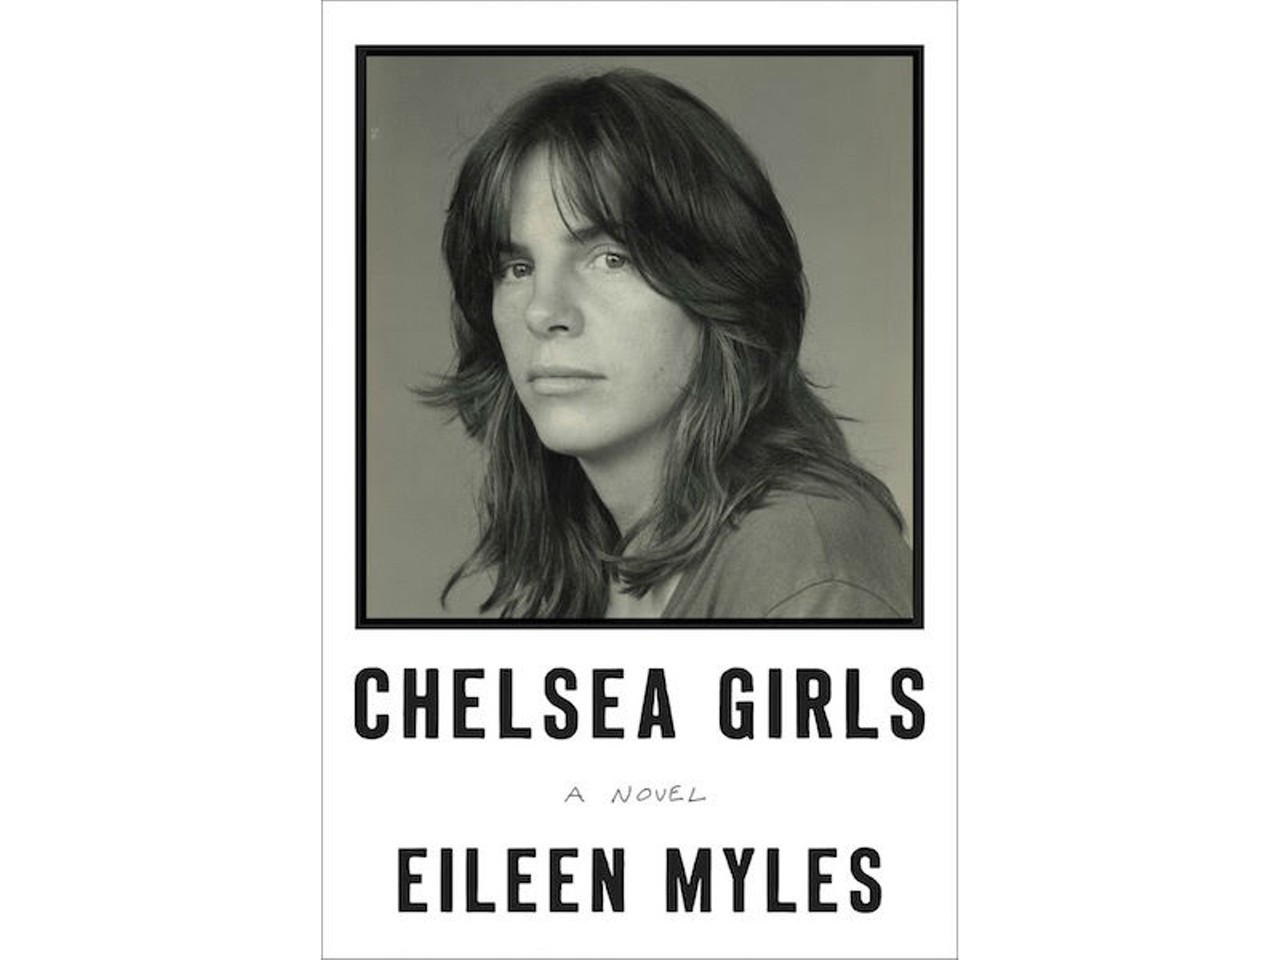 Chelsea Girls, a novel by Eileen Myles (Ecco, 288 pages)
The re-release of Myles' seminal novel is a momentous event. In Chelsea Girls, the woman who became a leading light of the 1970s downtown lesbian poetry scene "novelizes" her coming of age. But its appeal isn't limited to those who identify as lesbians, poets or old enough to have been alive in the '60s; it's a fresh, funny, picaresque tale of scrappy survival. &#151;JBY